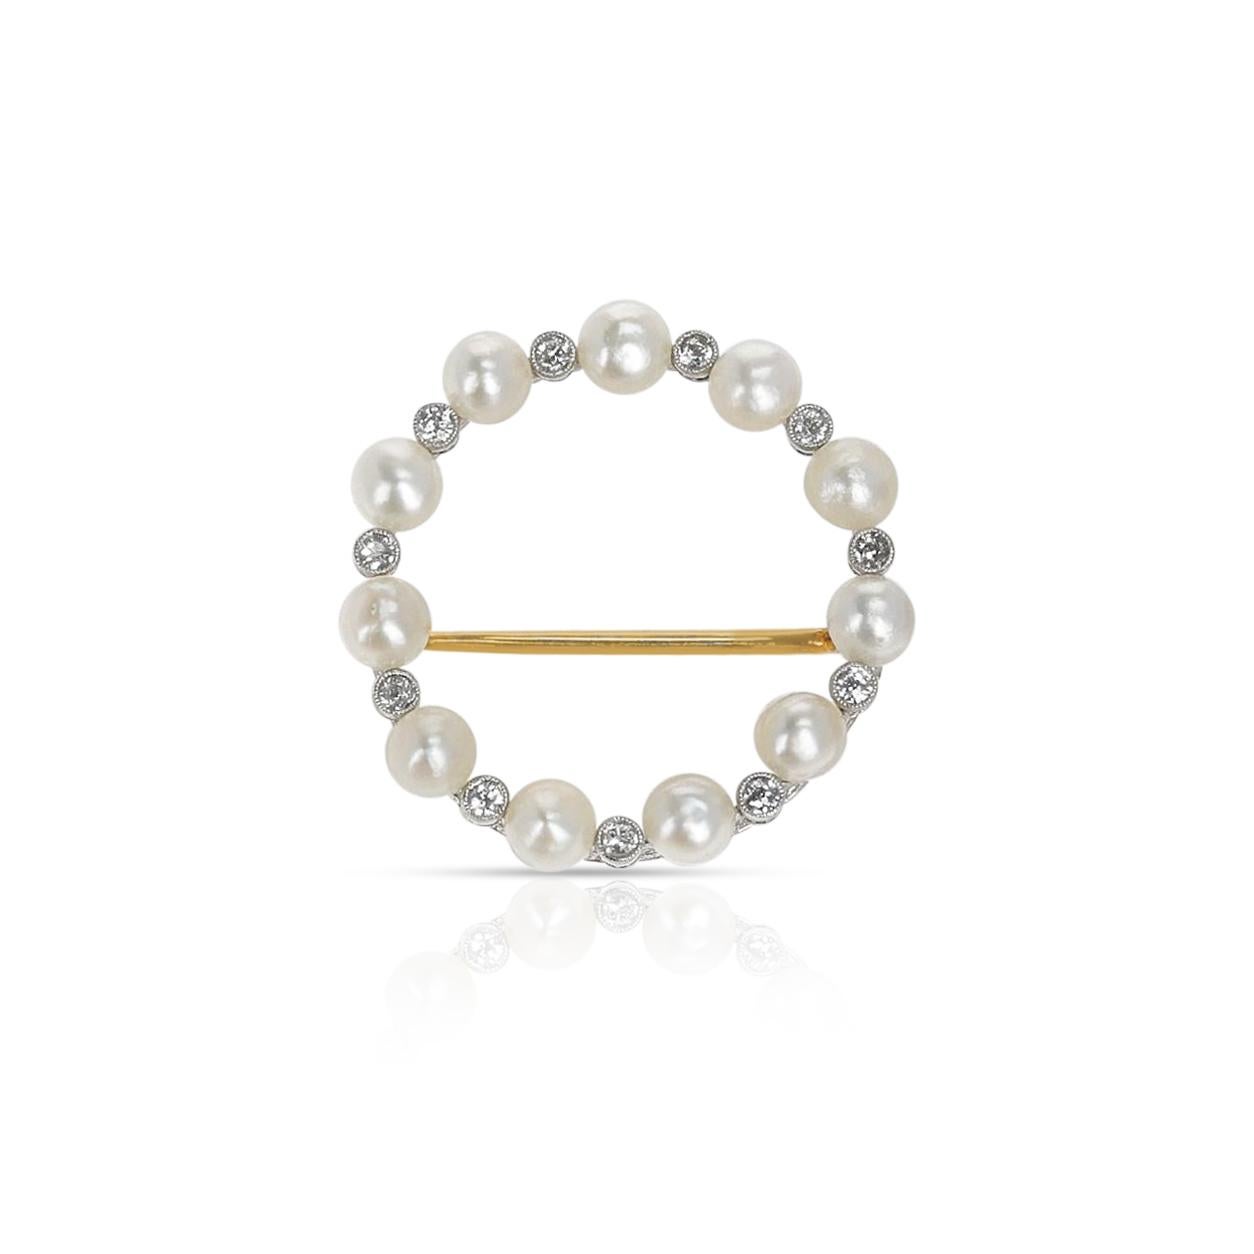 A Victorian Natural Pearl and Diamond Brooch. The length is 1 inch. The total weight is 7.09 grams. 